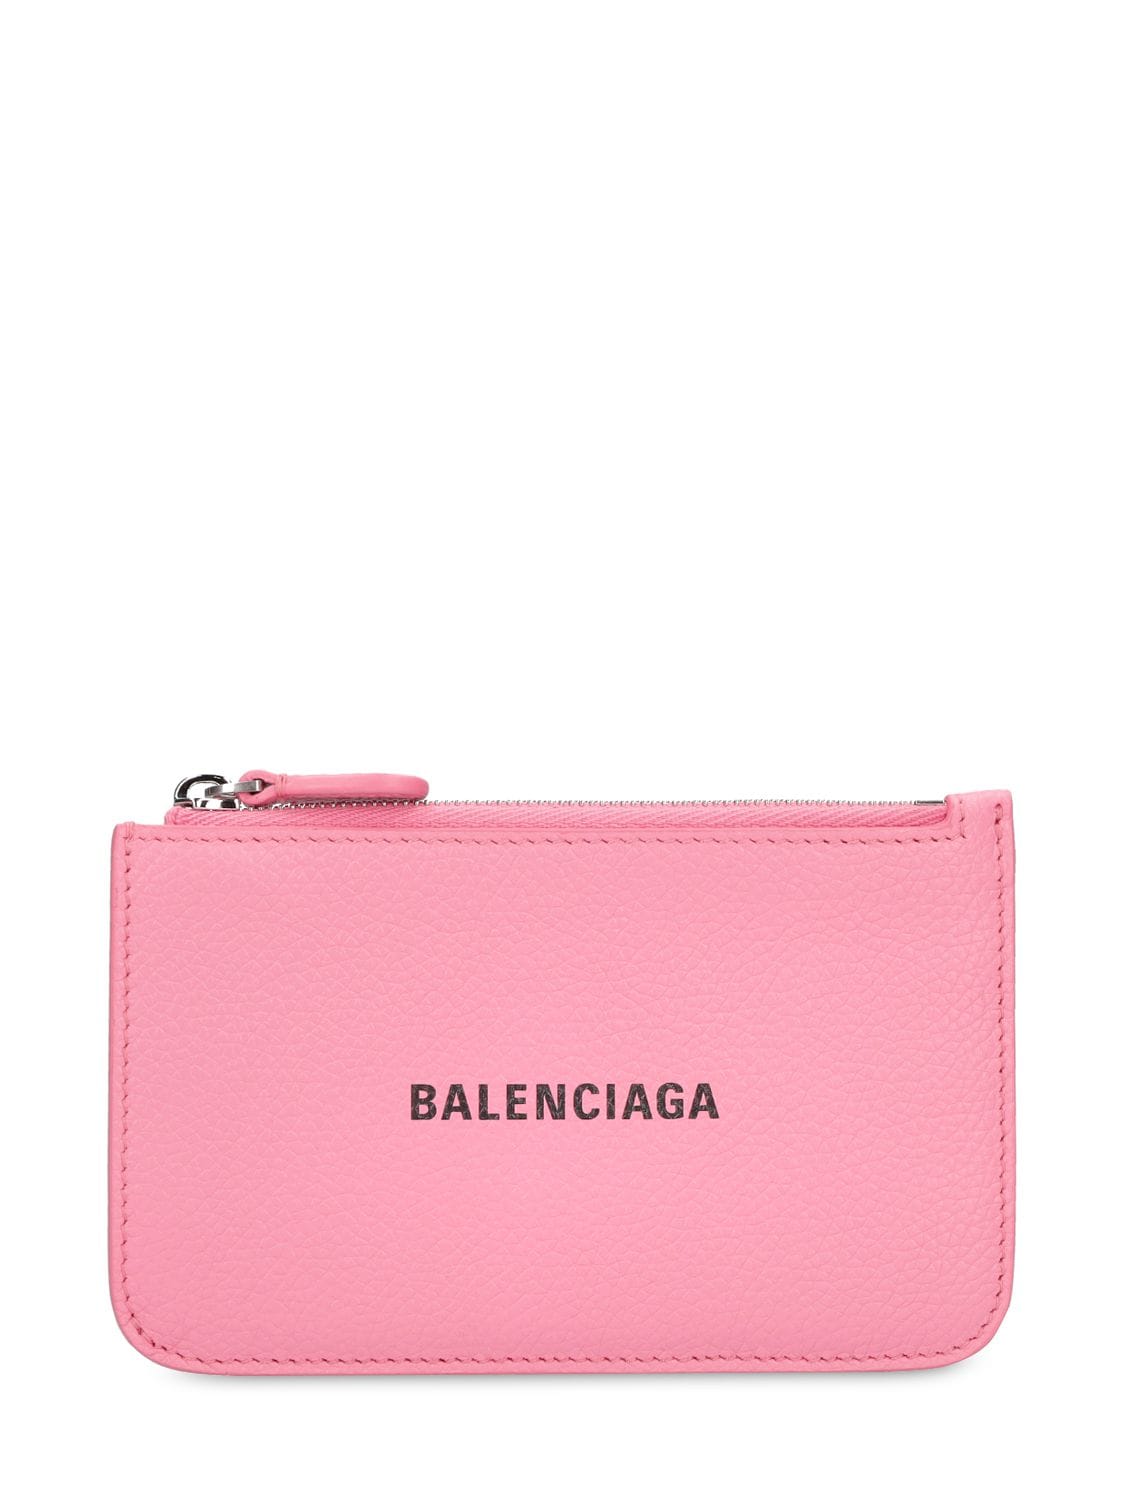 Balenciaga Zipped Leather Coin Purse In Sweet Pink